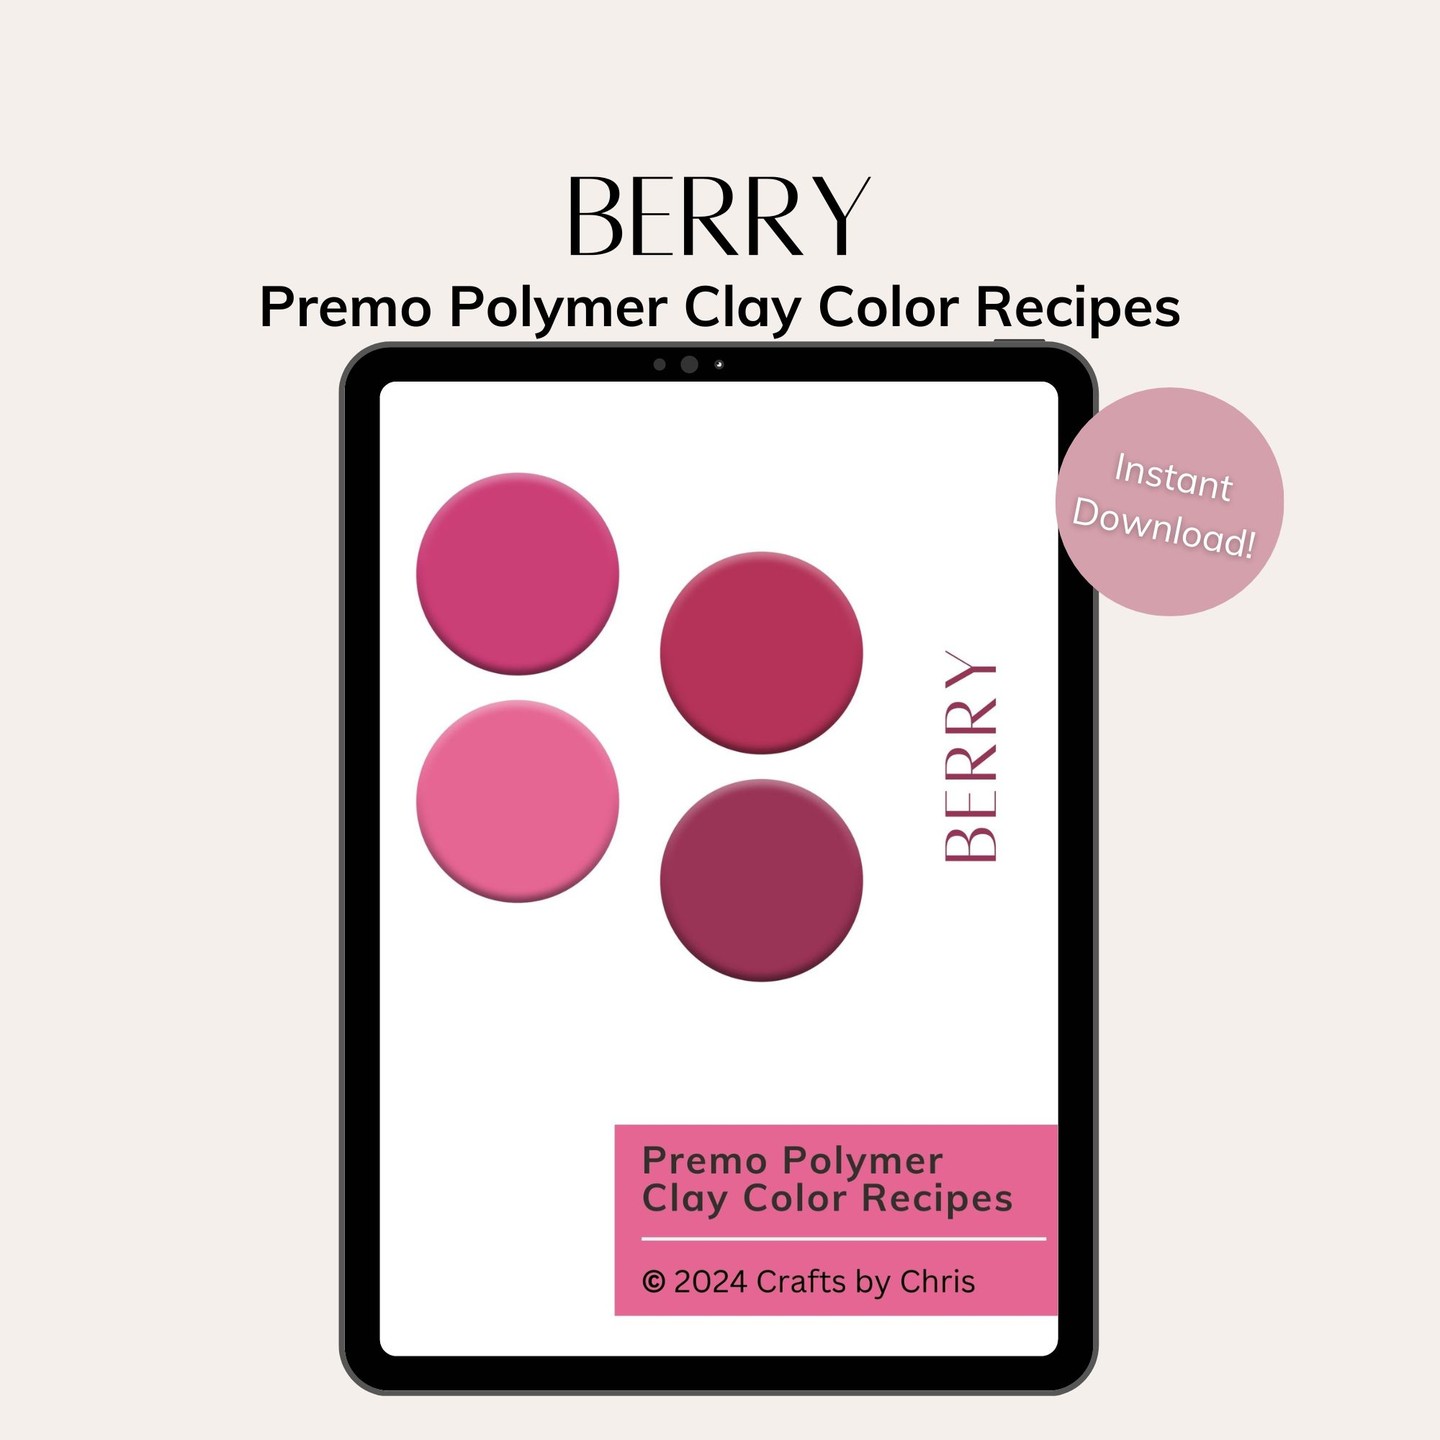 New Berry color palette - premo polymer clay color recipes. link to shop in bio.

#polymerclay #polymerclaycolorrecipes 